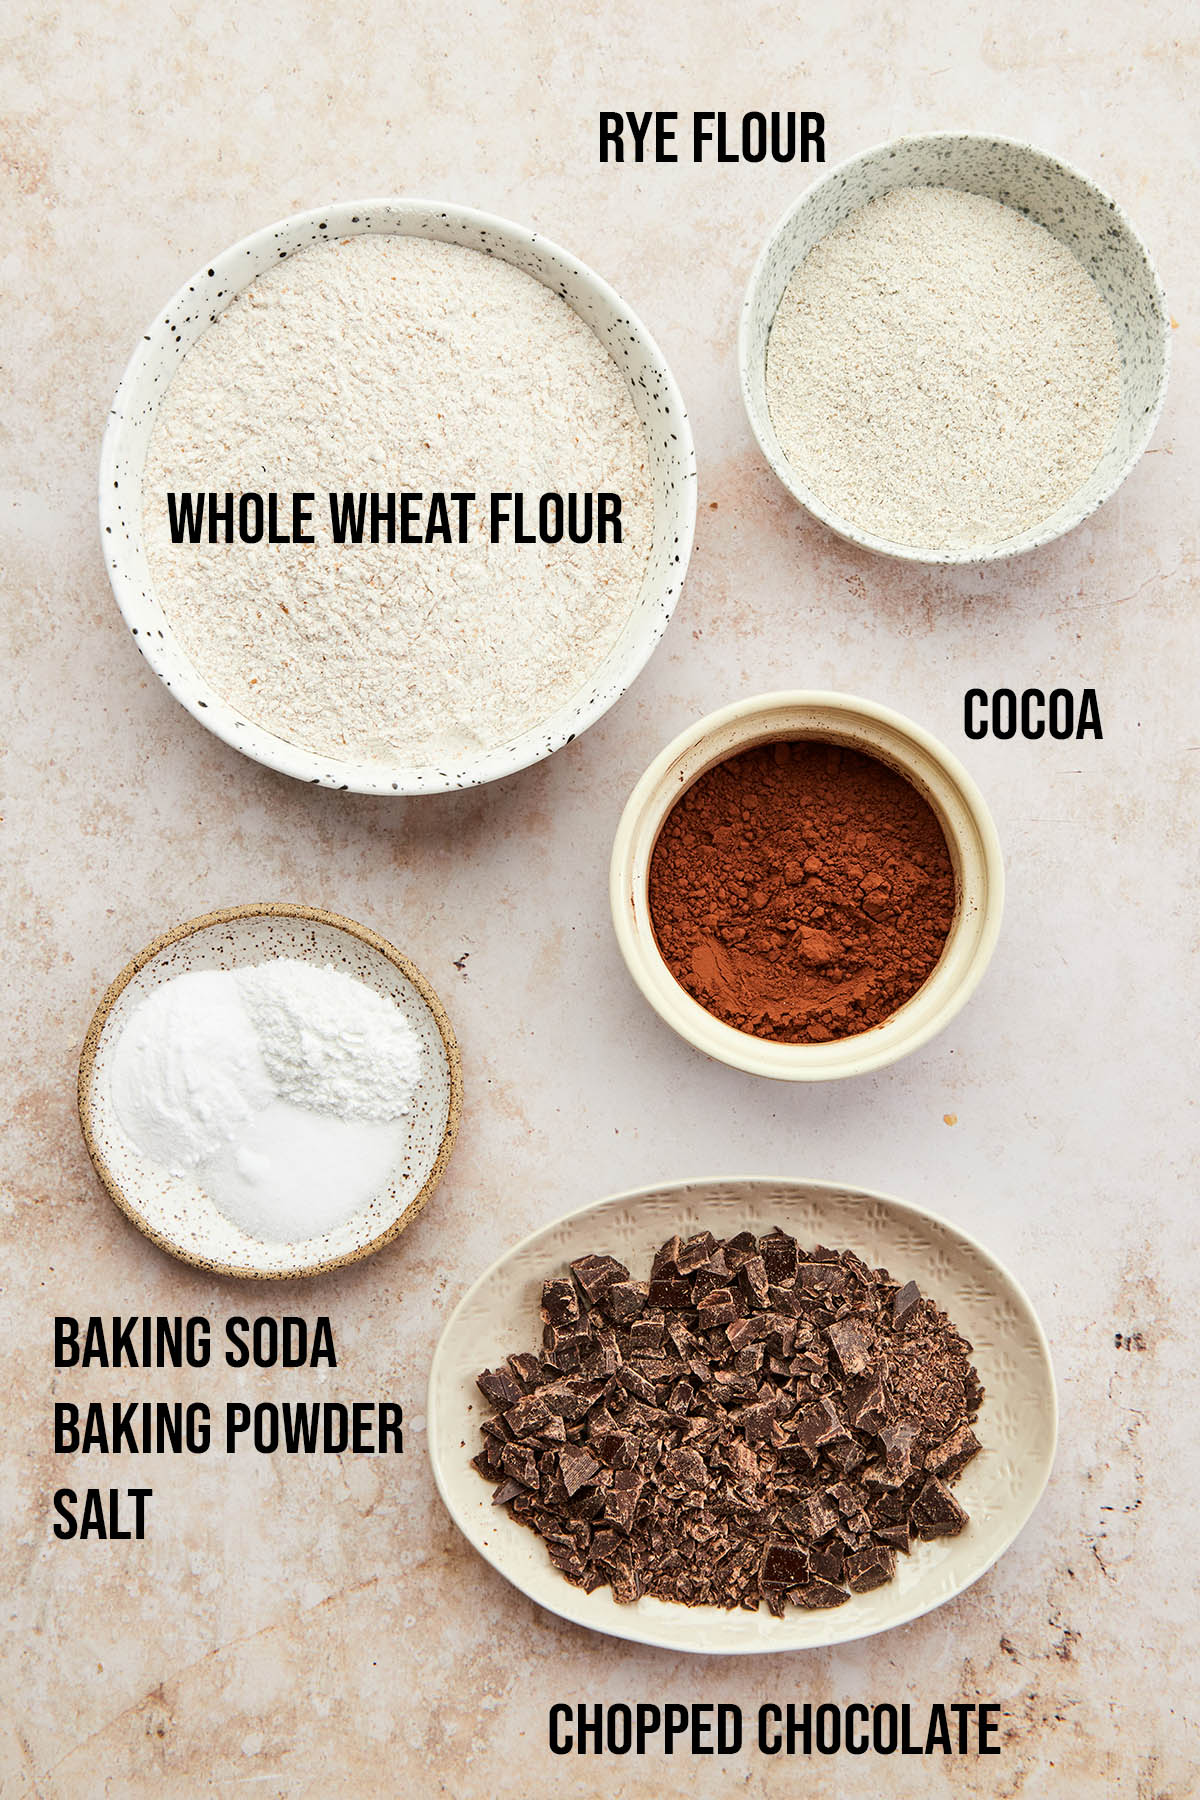 Dry ingredients to make a cake.